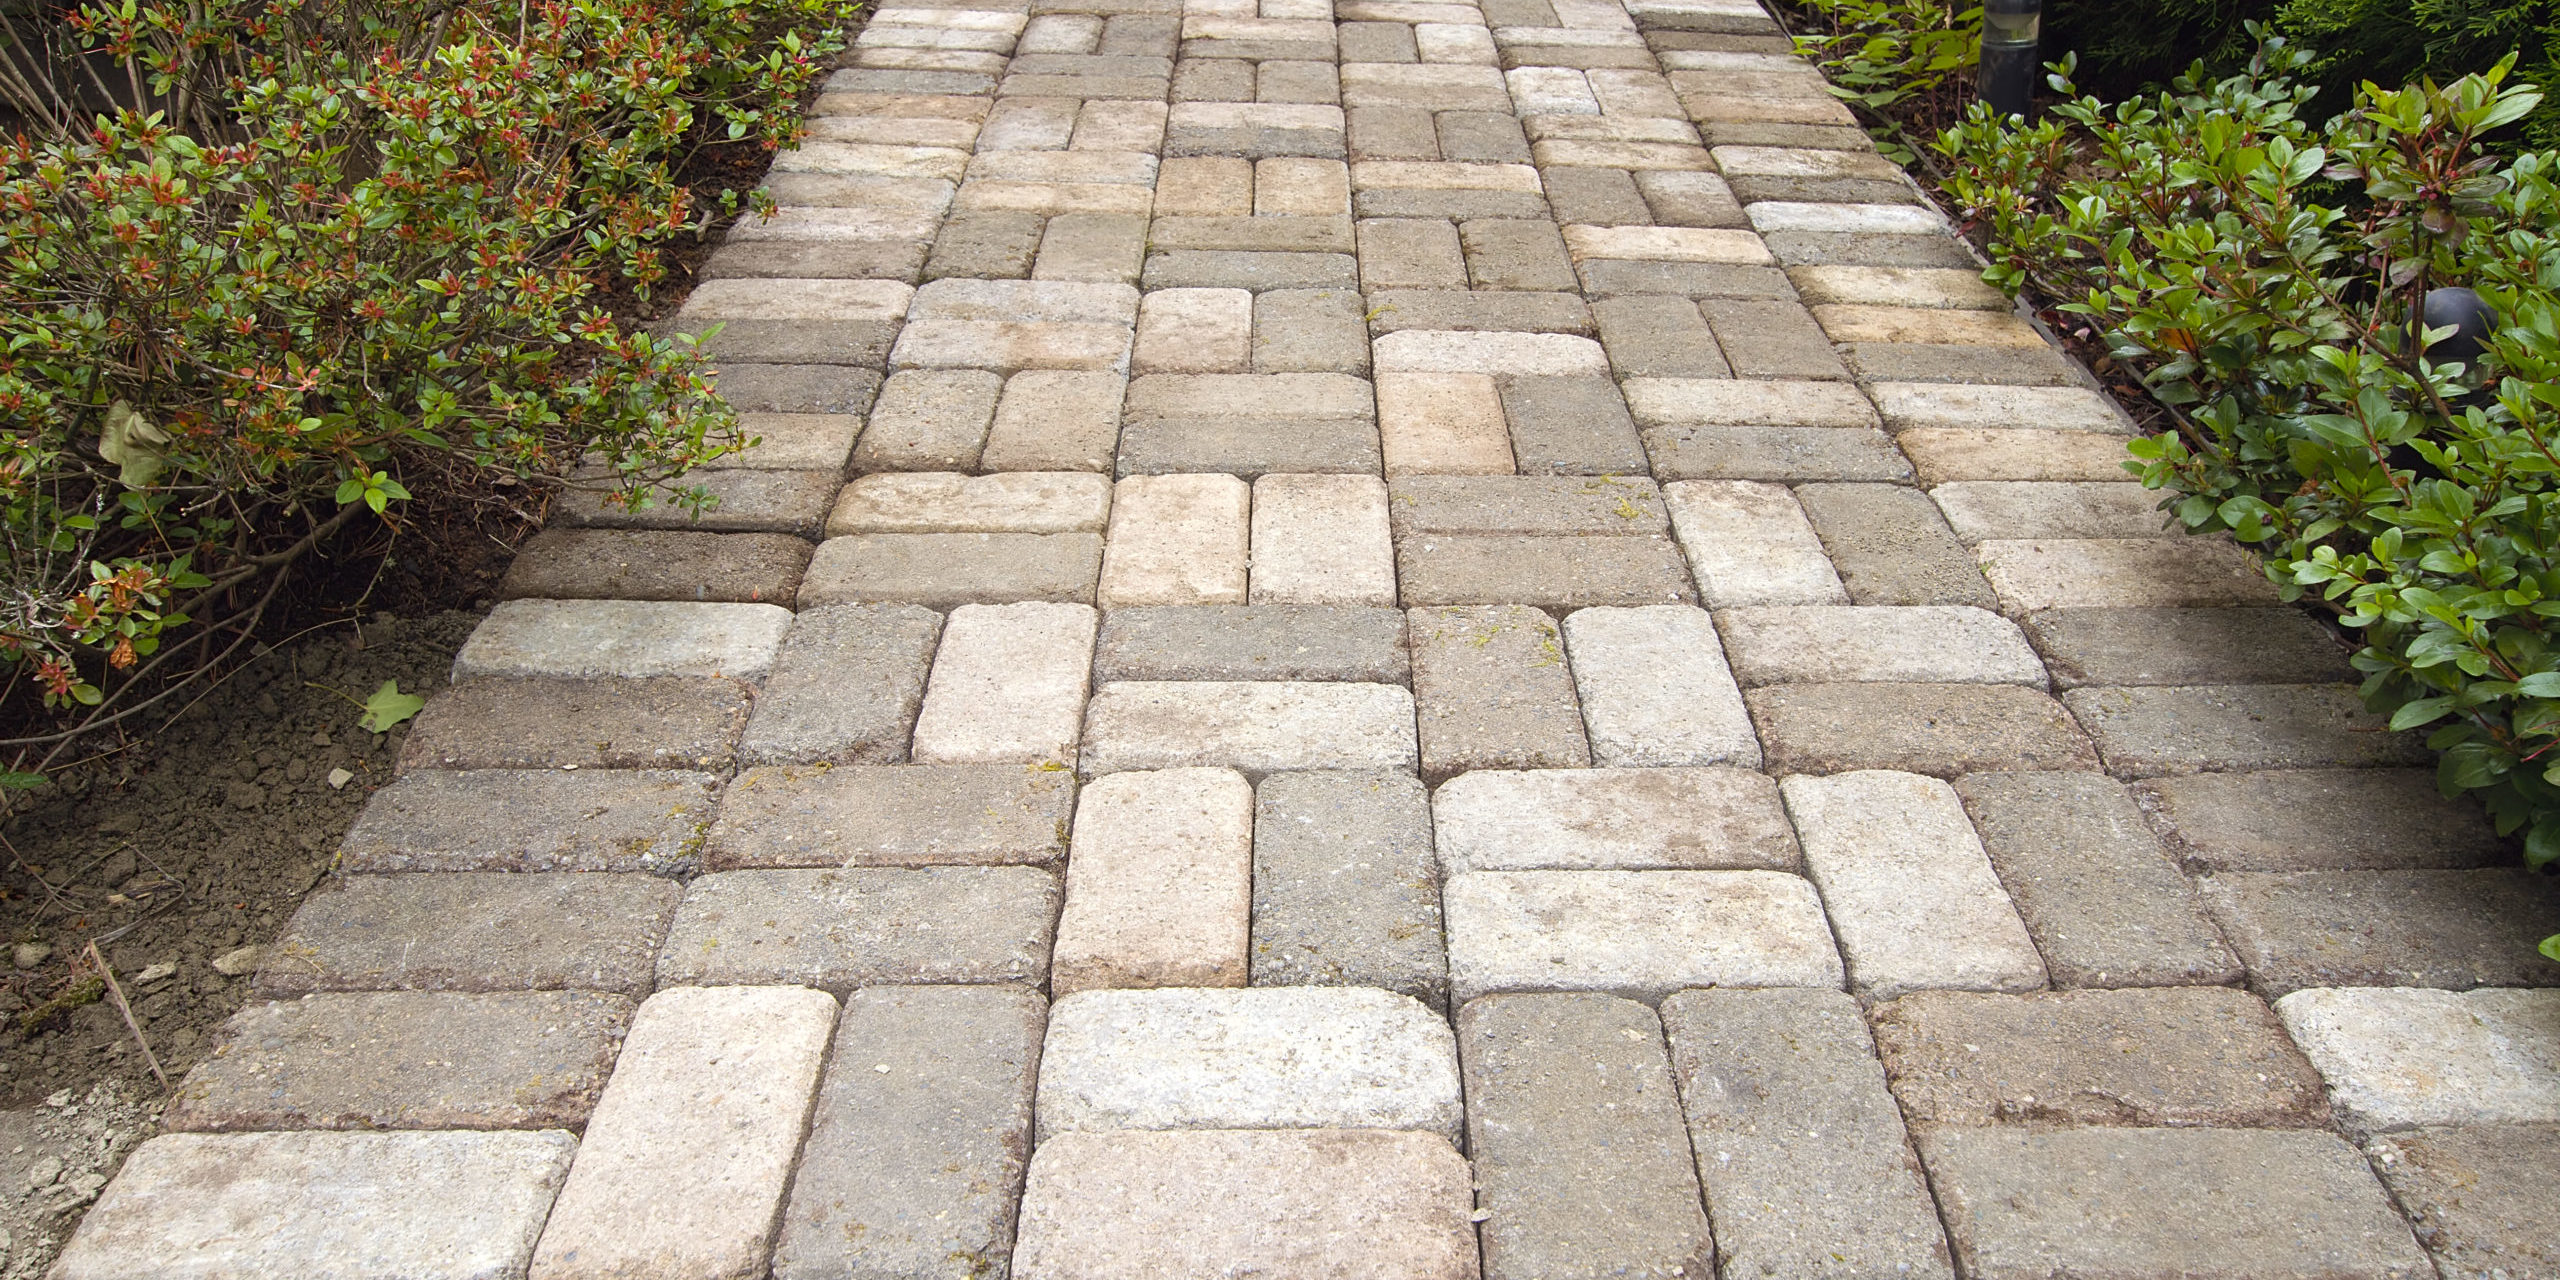 Things to Consider When Choosing the Pavers for Your Home